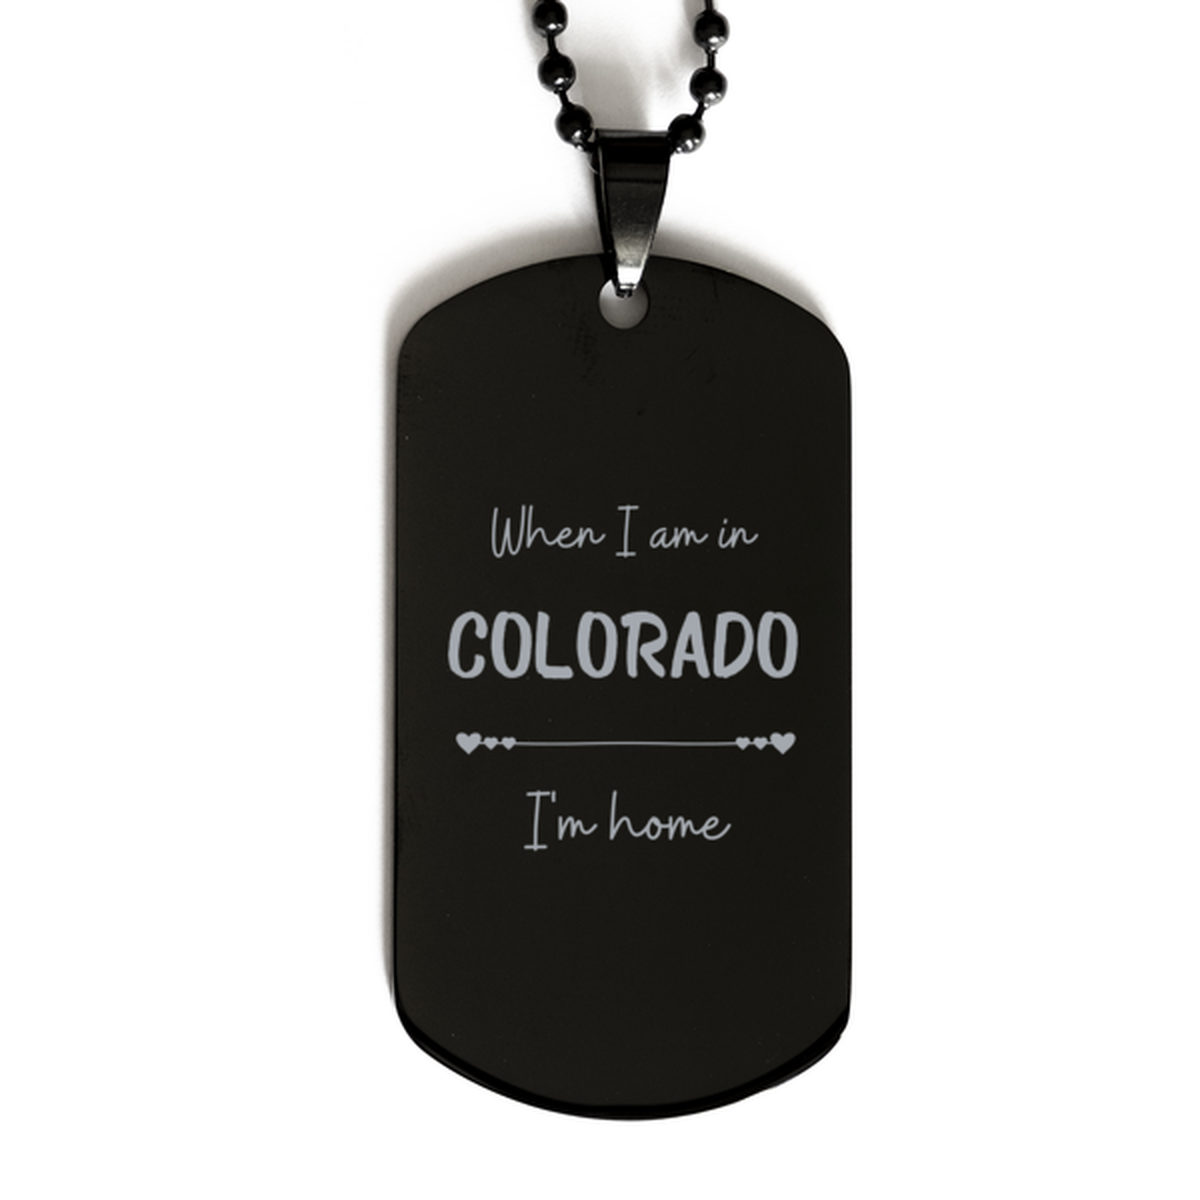 When I am in Colorado I'm home Black Dog Tag, Cheap Gifts For Colorado, State Colorado Birthday Gifts for Friends Coworker